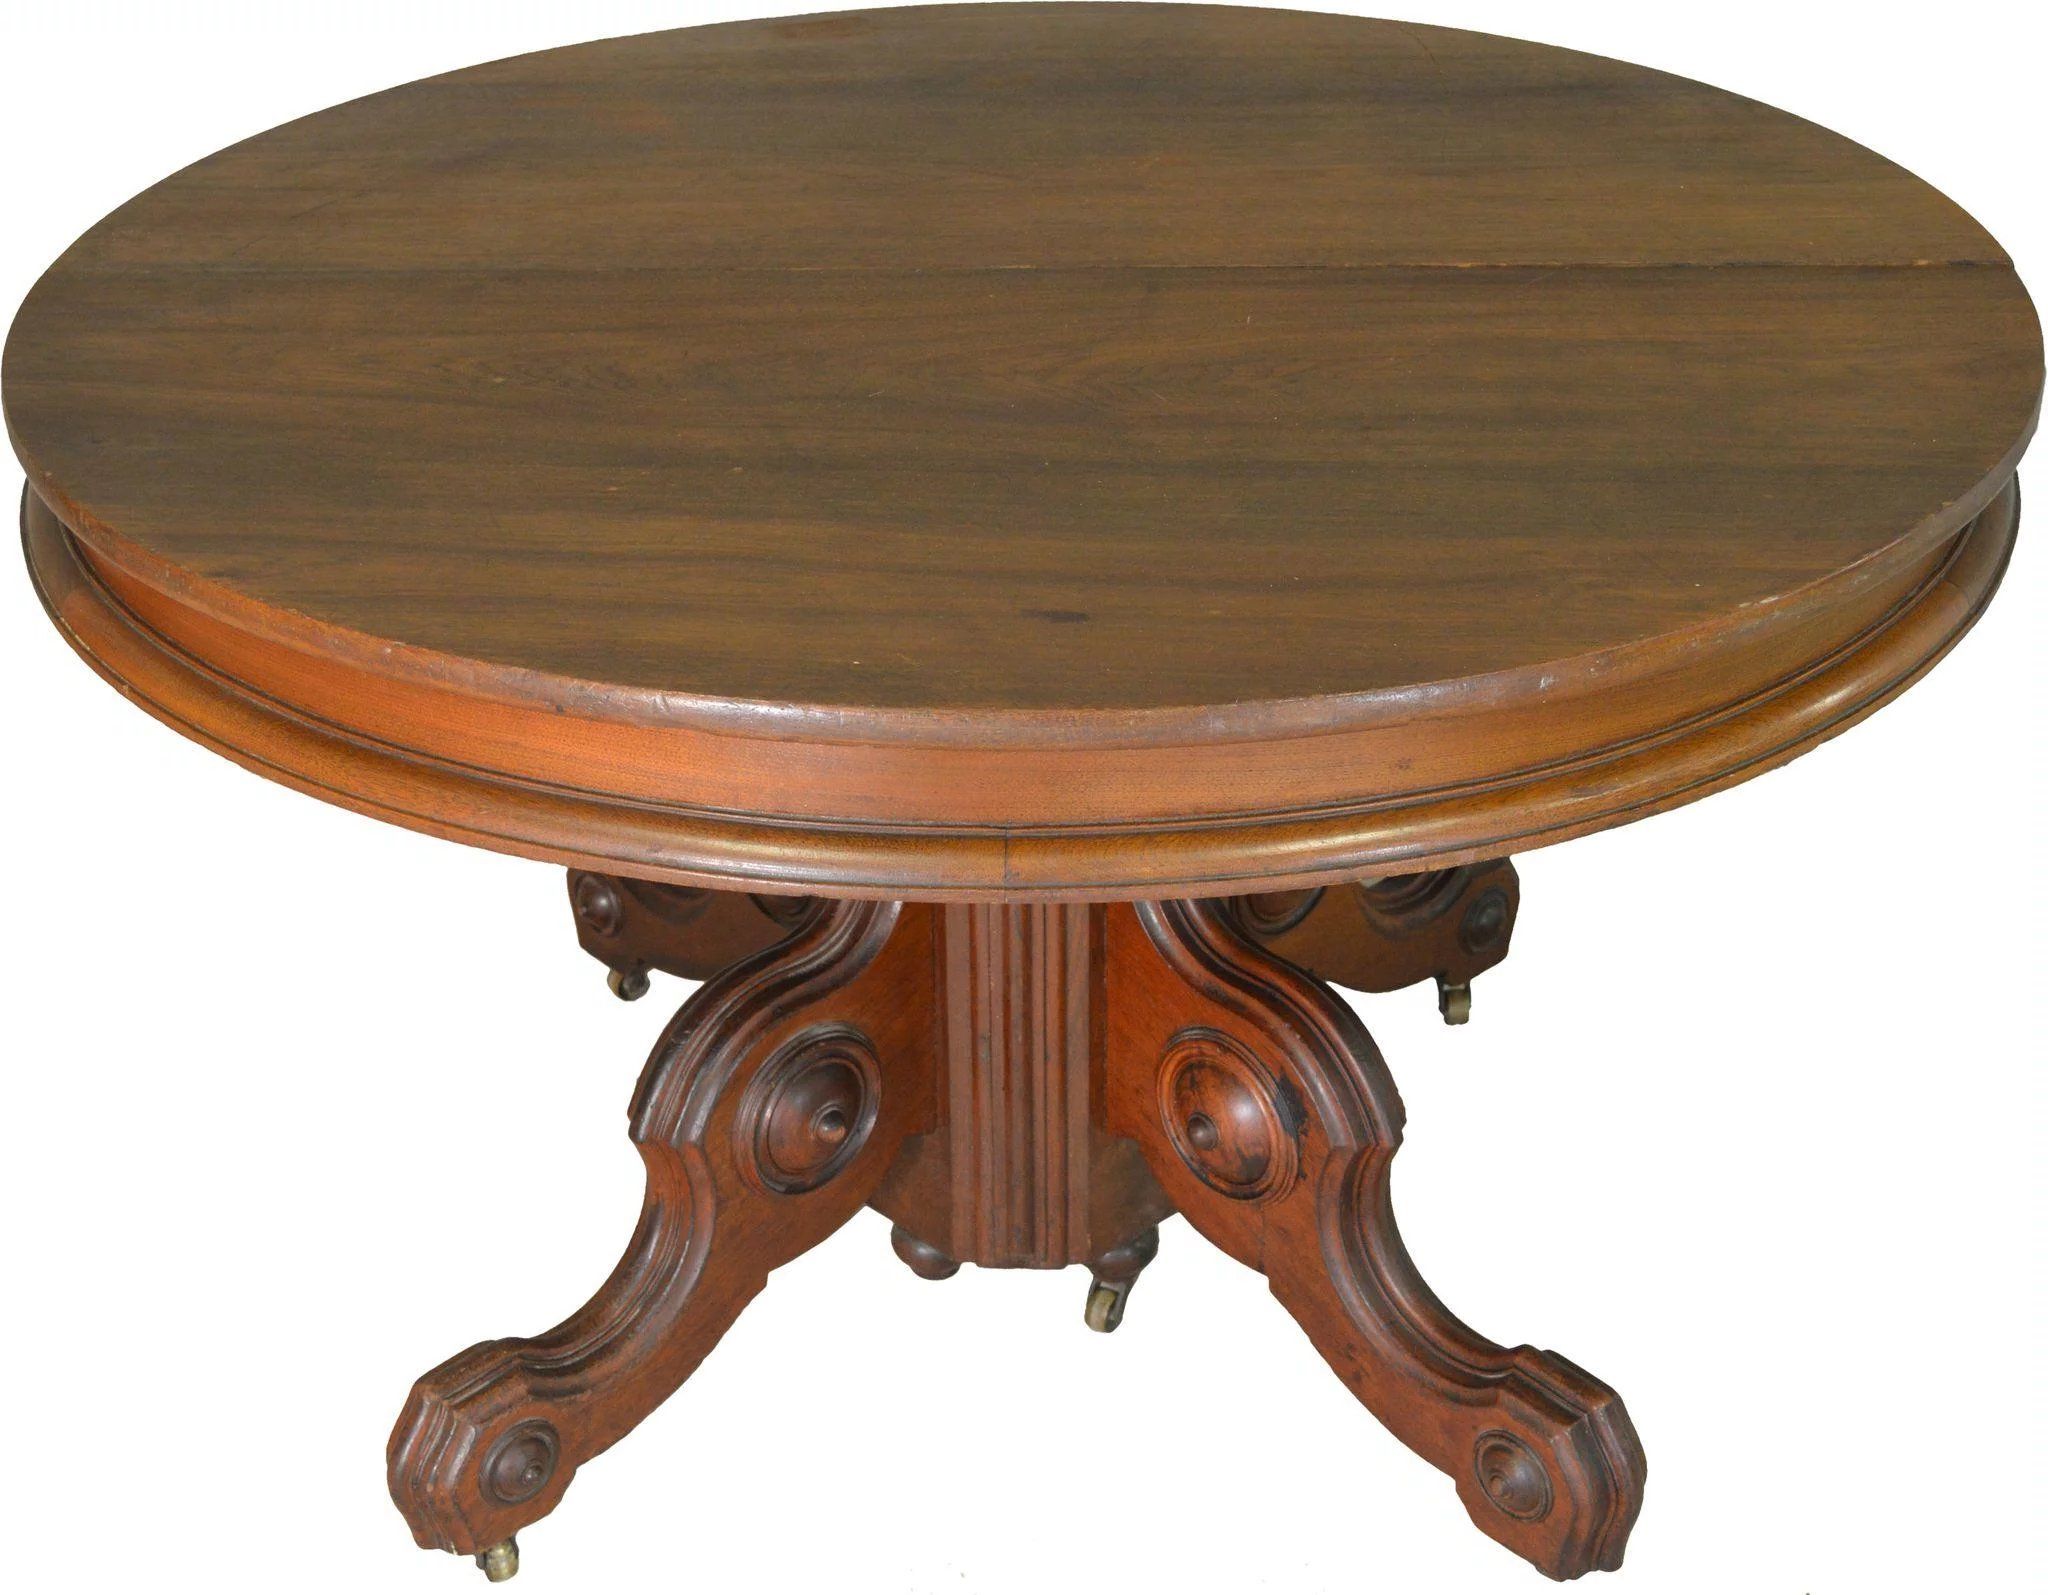 Well Known Vintage Brown Round Dining Tables Intended For Victorian Round Walnut Dining Table : Maine Antique (View 3 of 15)